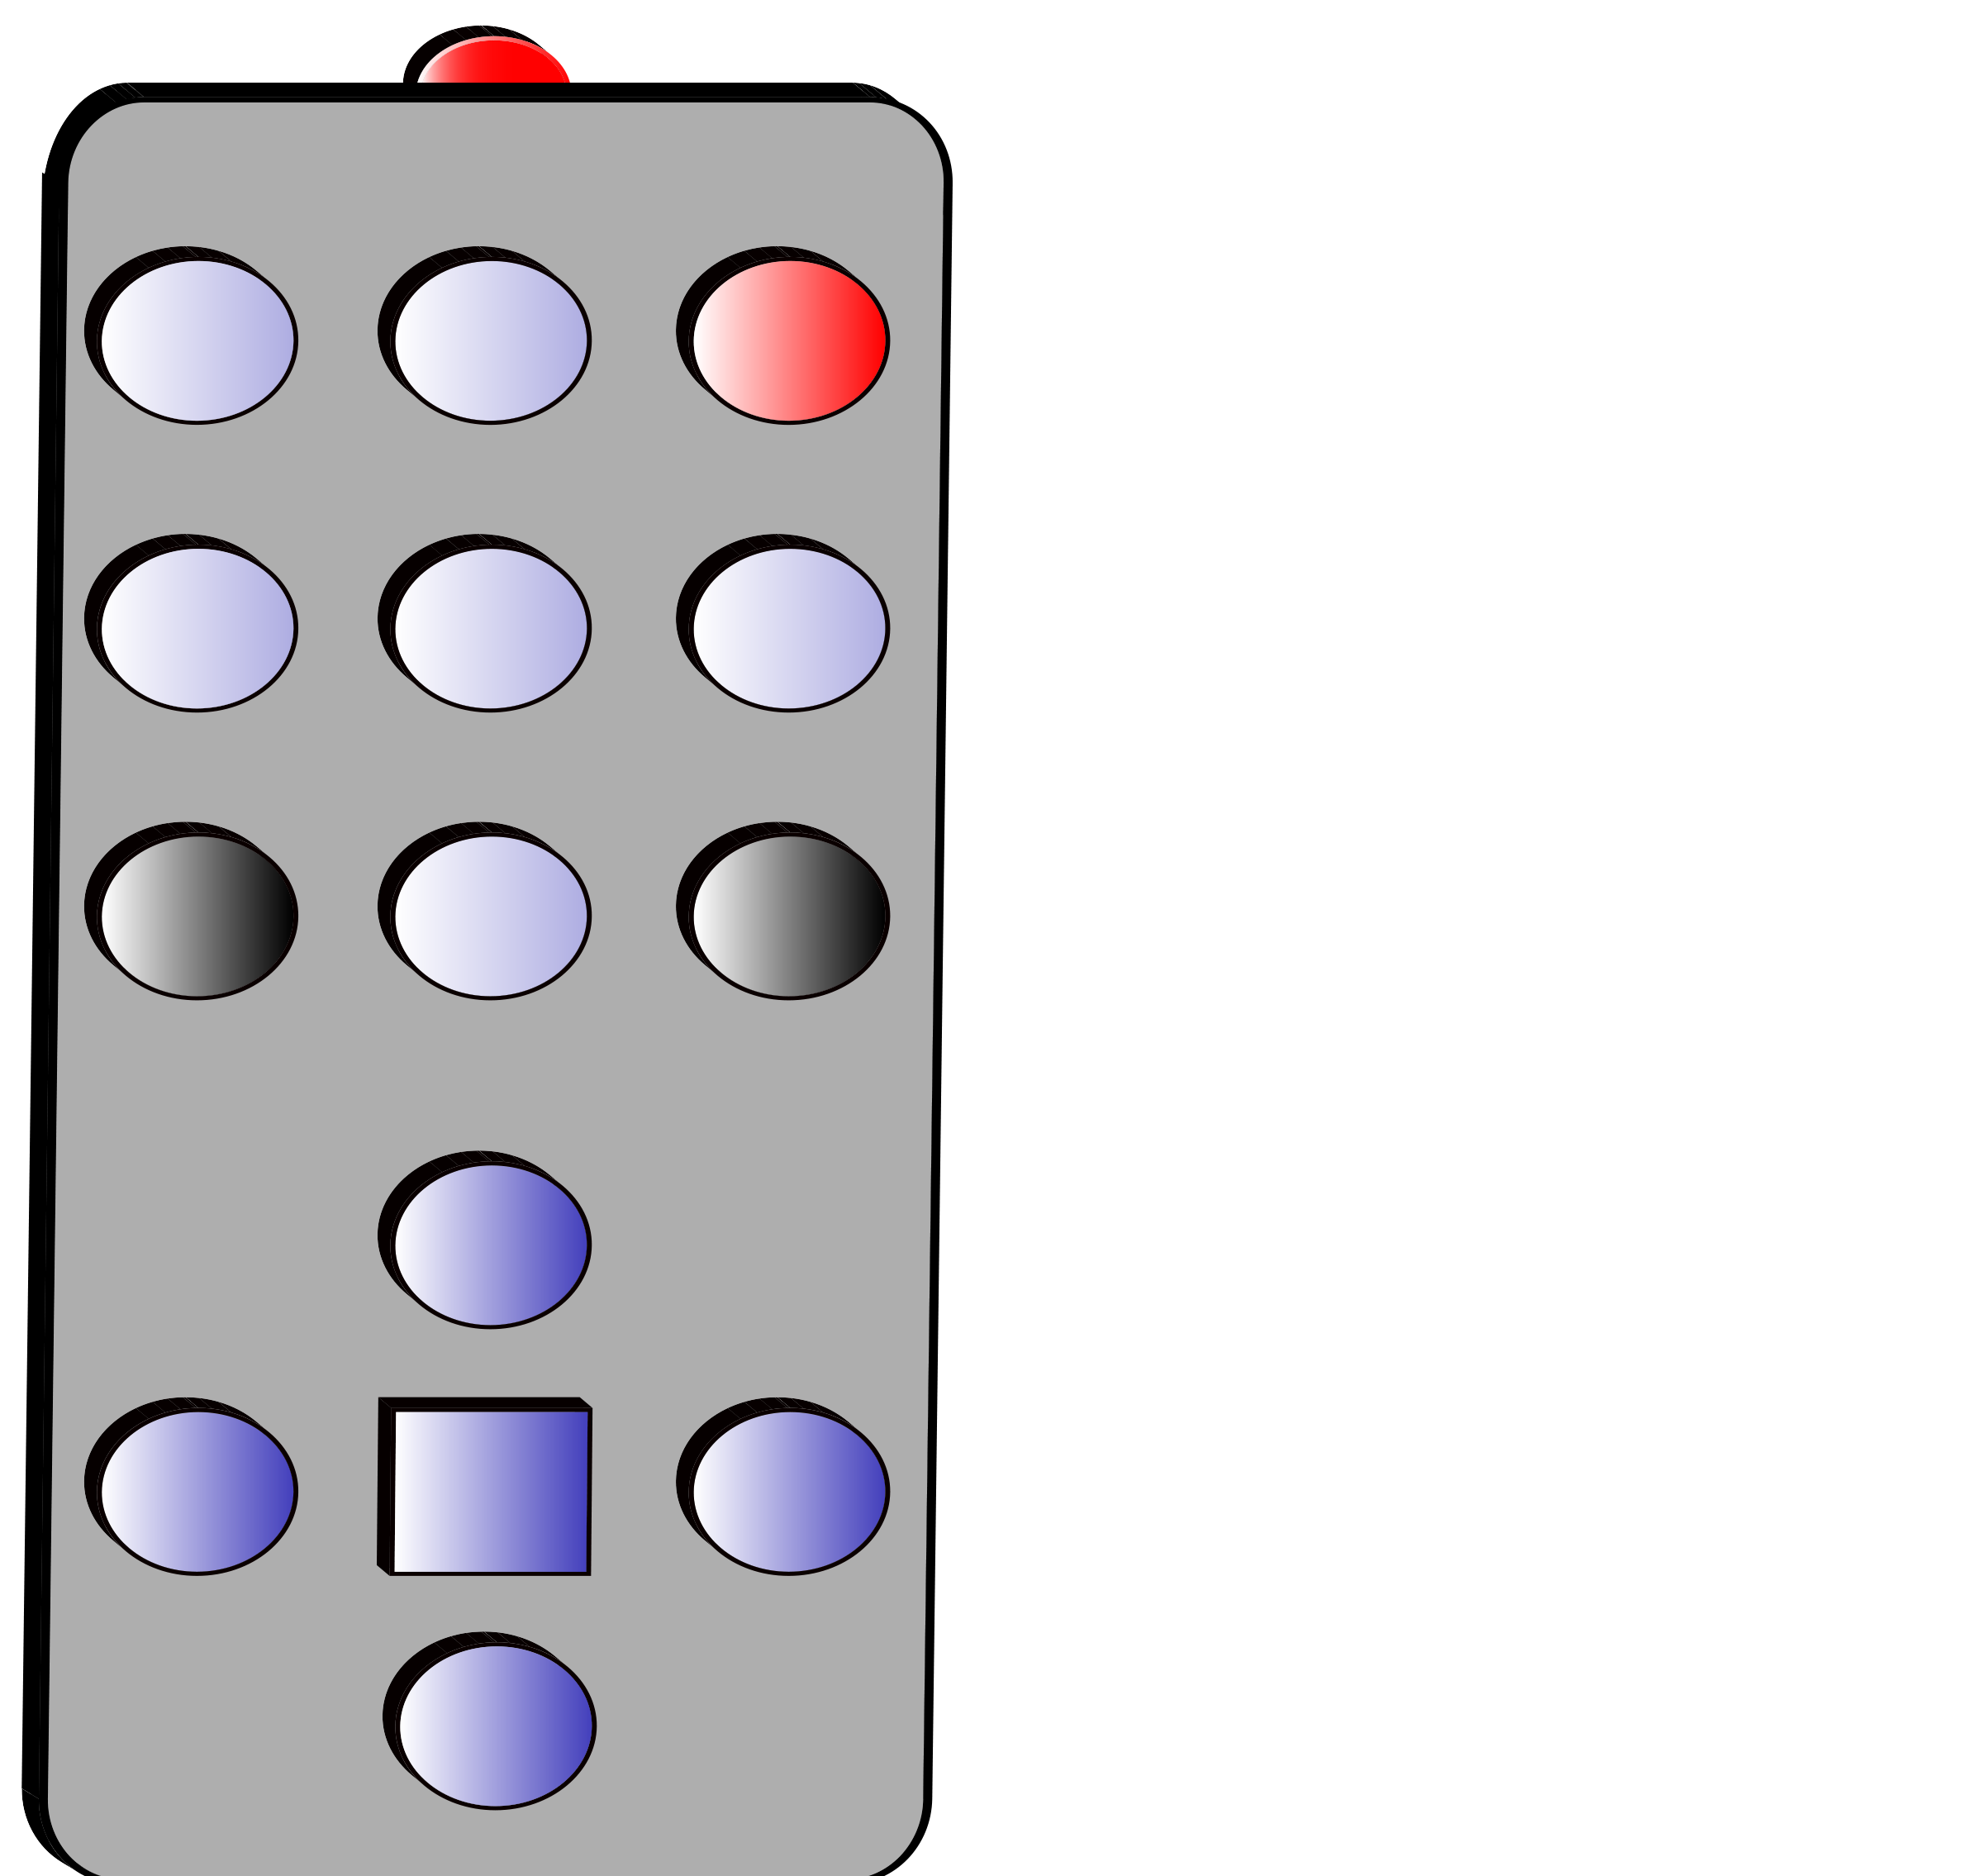 controller clipart simple